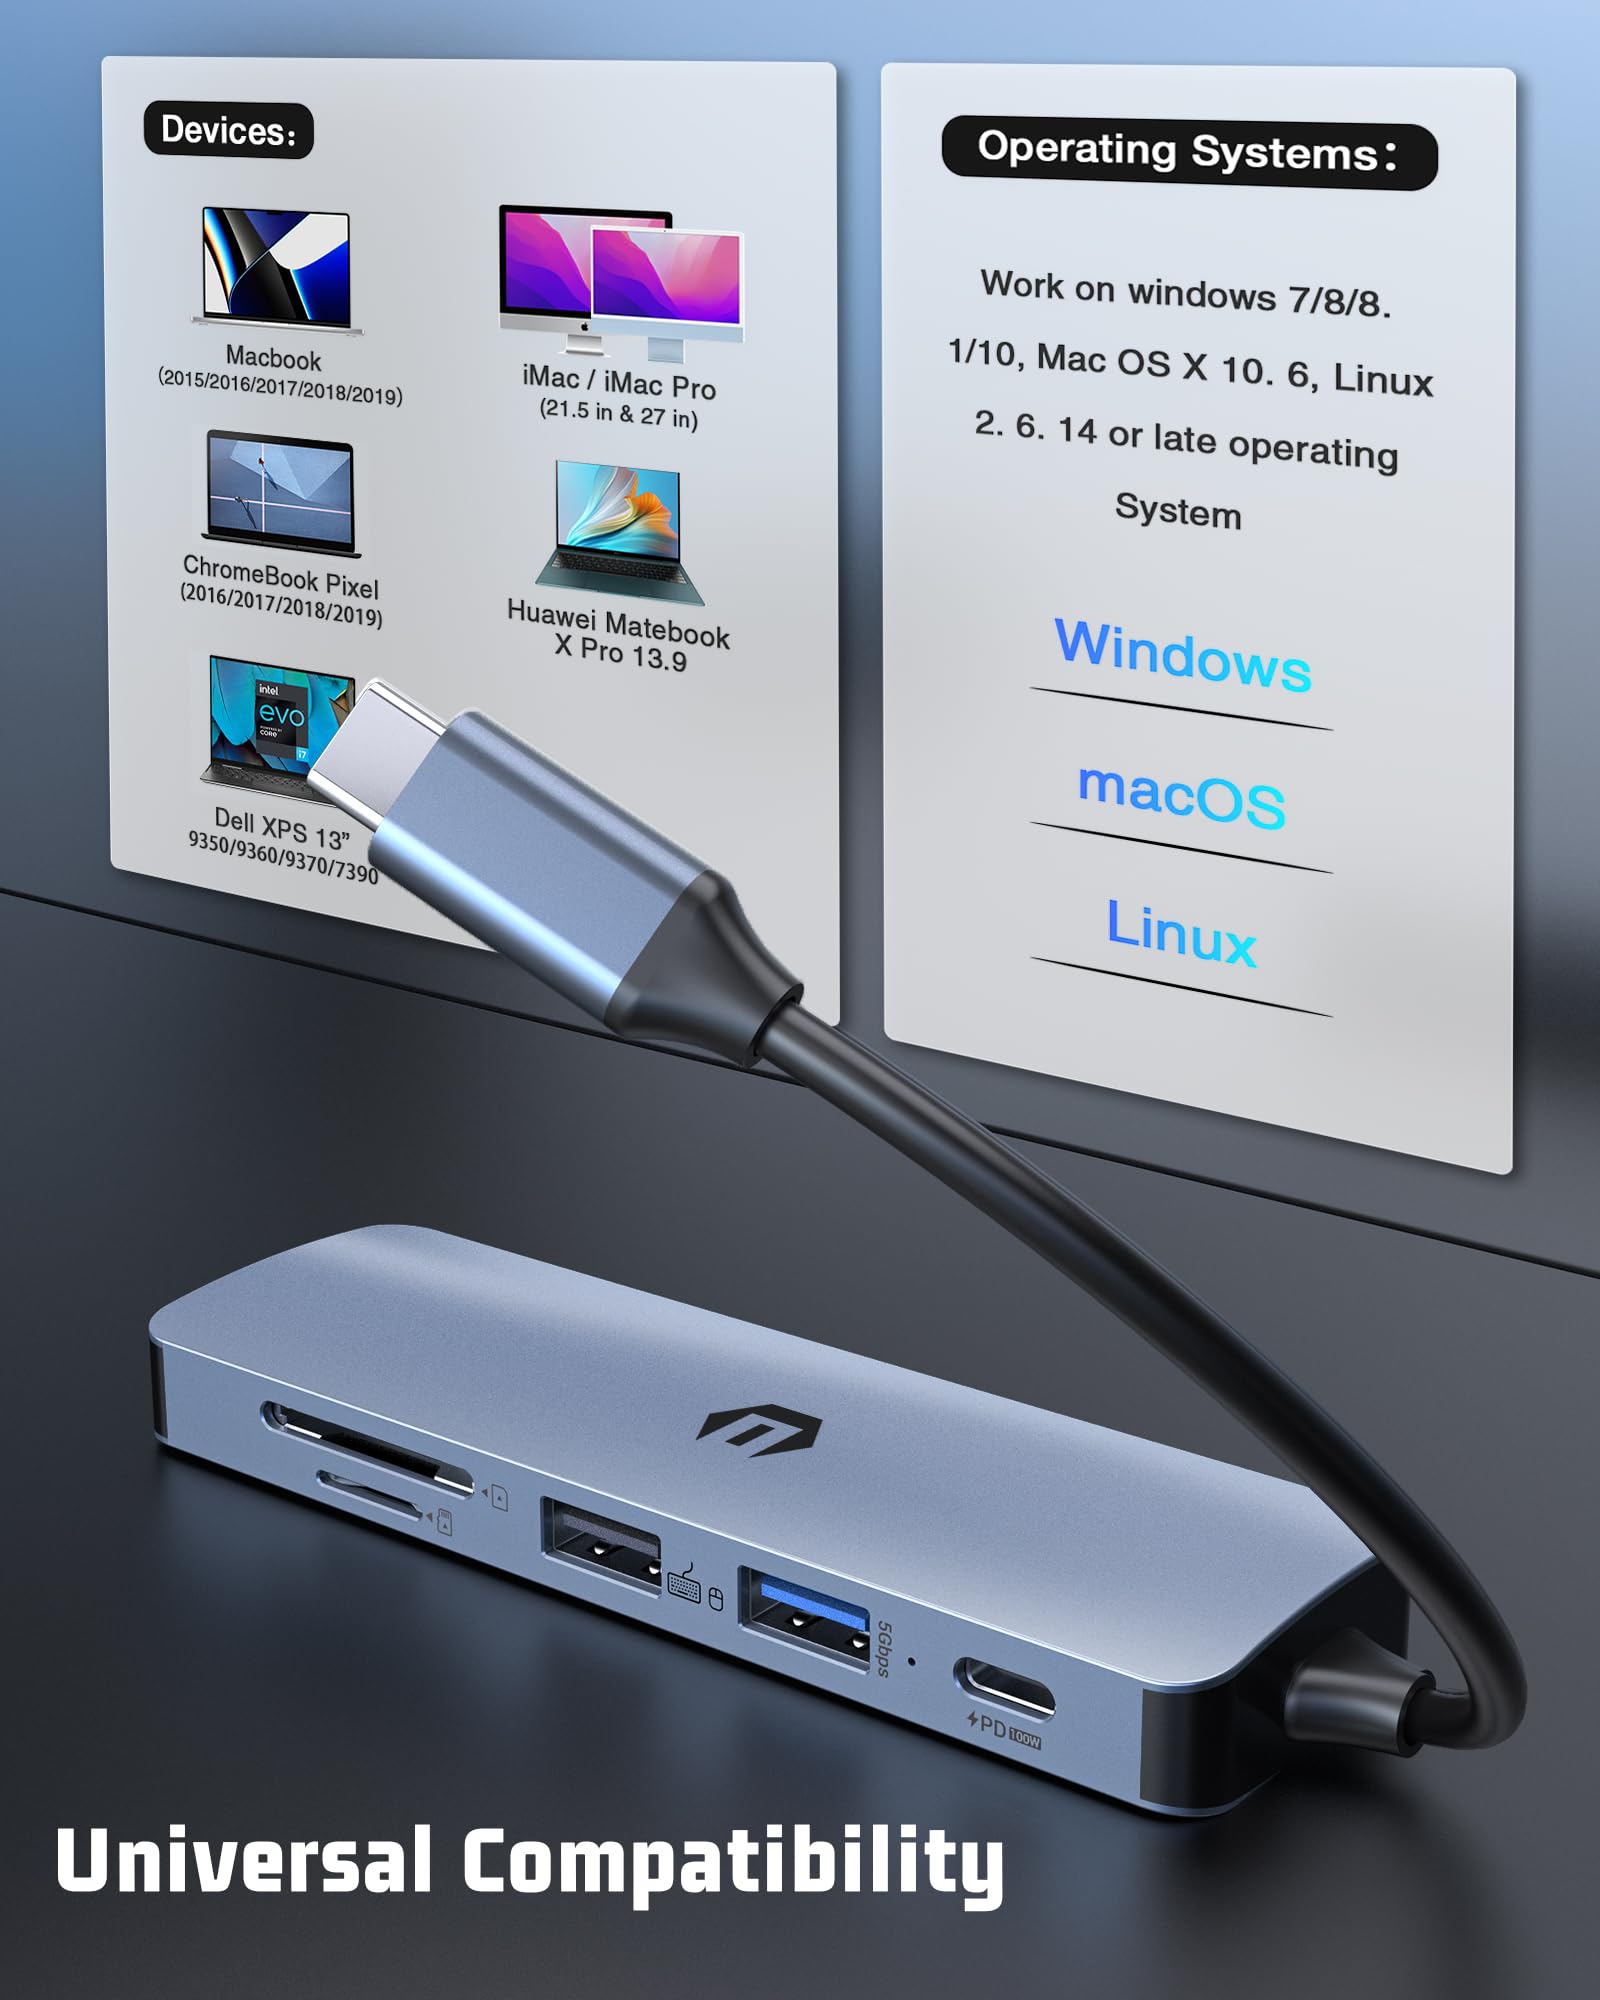 oditton 6 in 1 USB C Hub for Mac Pro/Air, iPad Pro, iMac and Beyond, Includes 4K HDMI, 100W PD, USB Ports and Card Reader